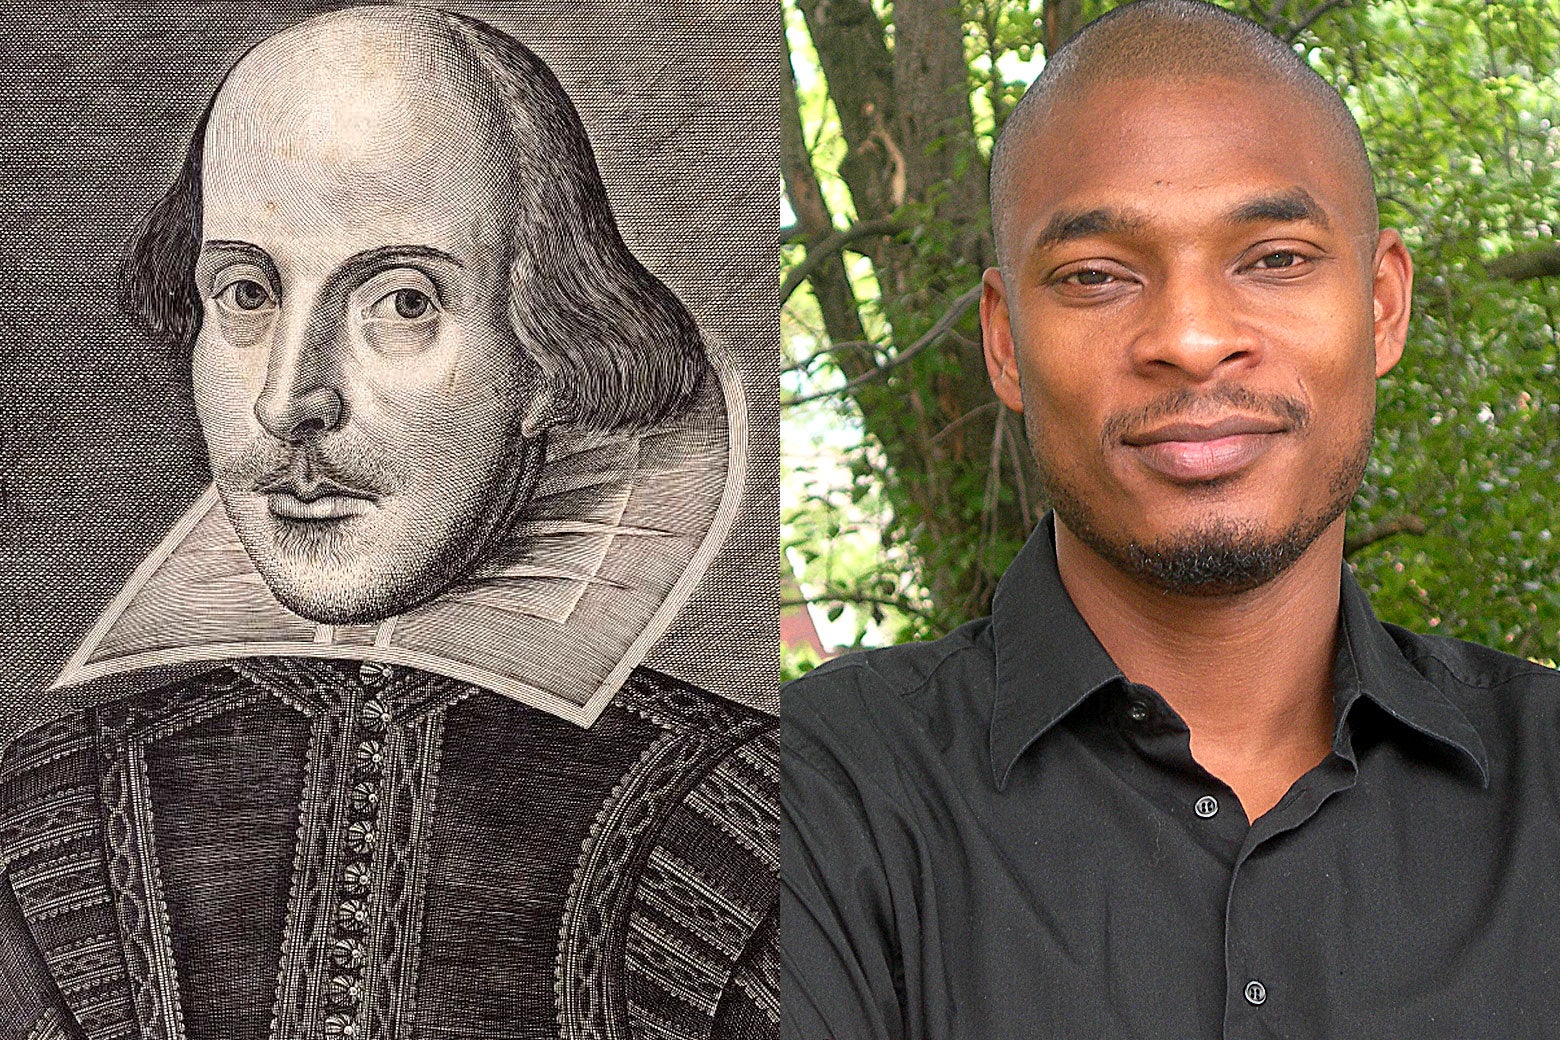 Side-by-side photo illustration of poets William Shakespeare and Terrance Hayes